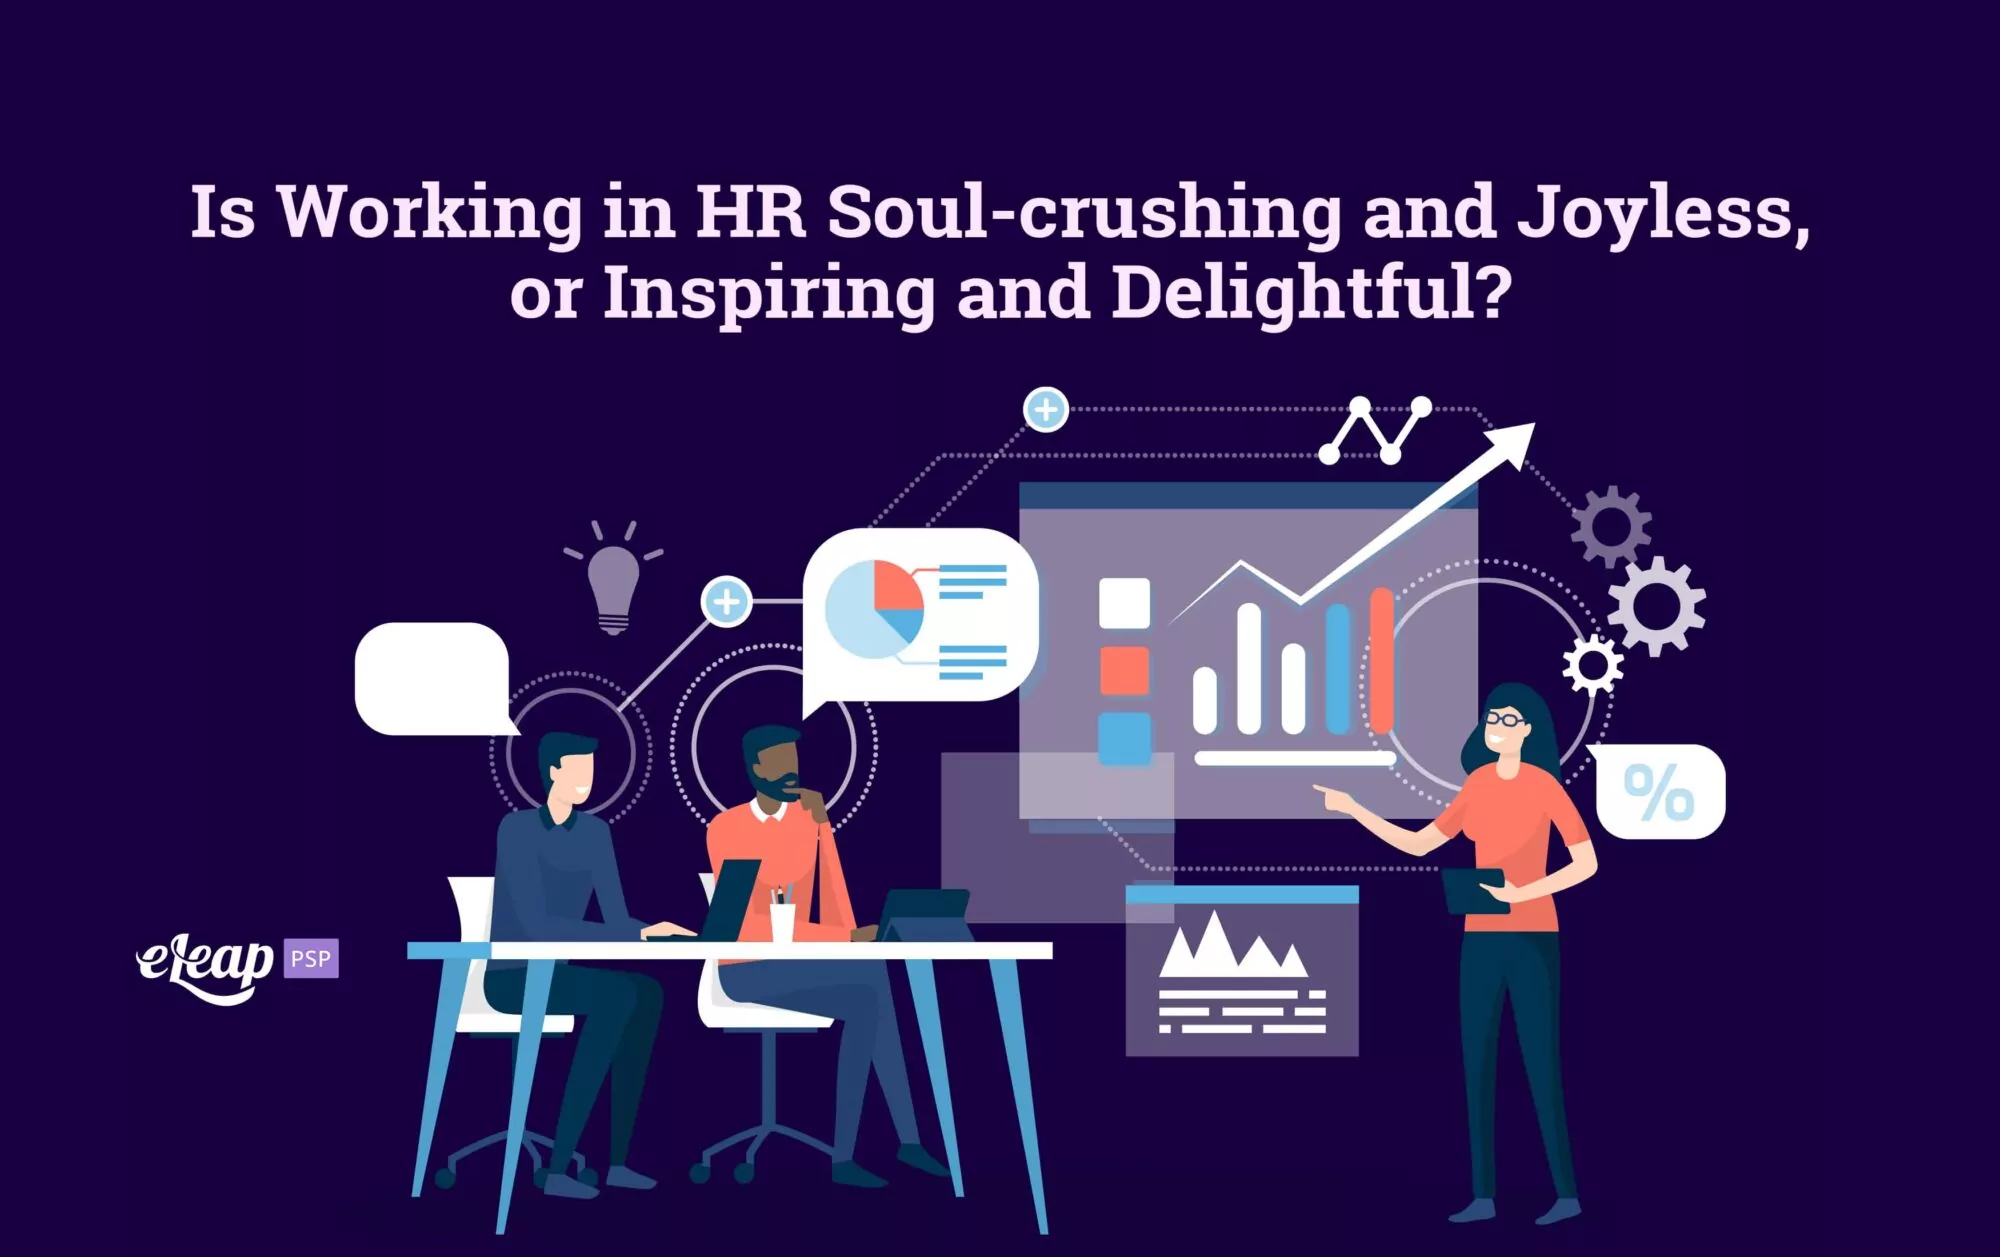 Is Working in HR Soul-crushing and Joyless, or Inspiring and Delightful?